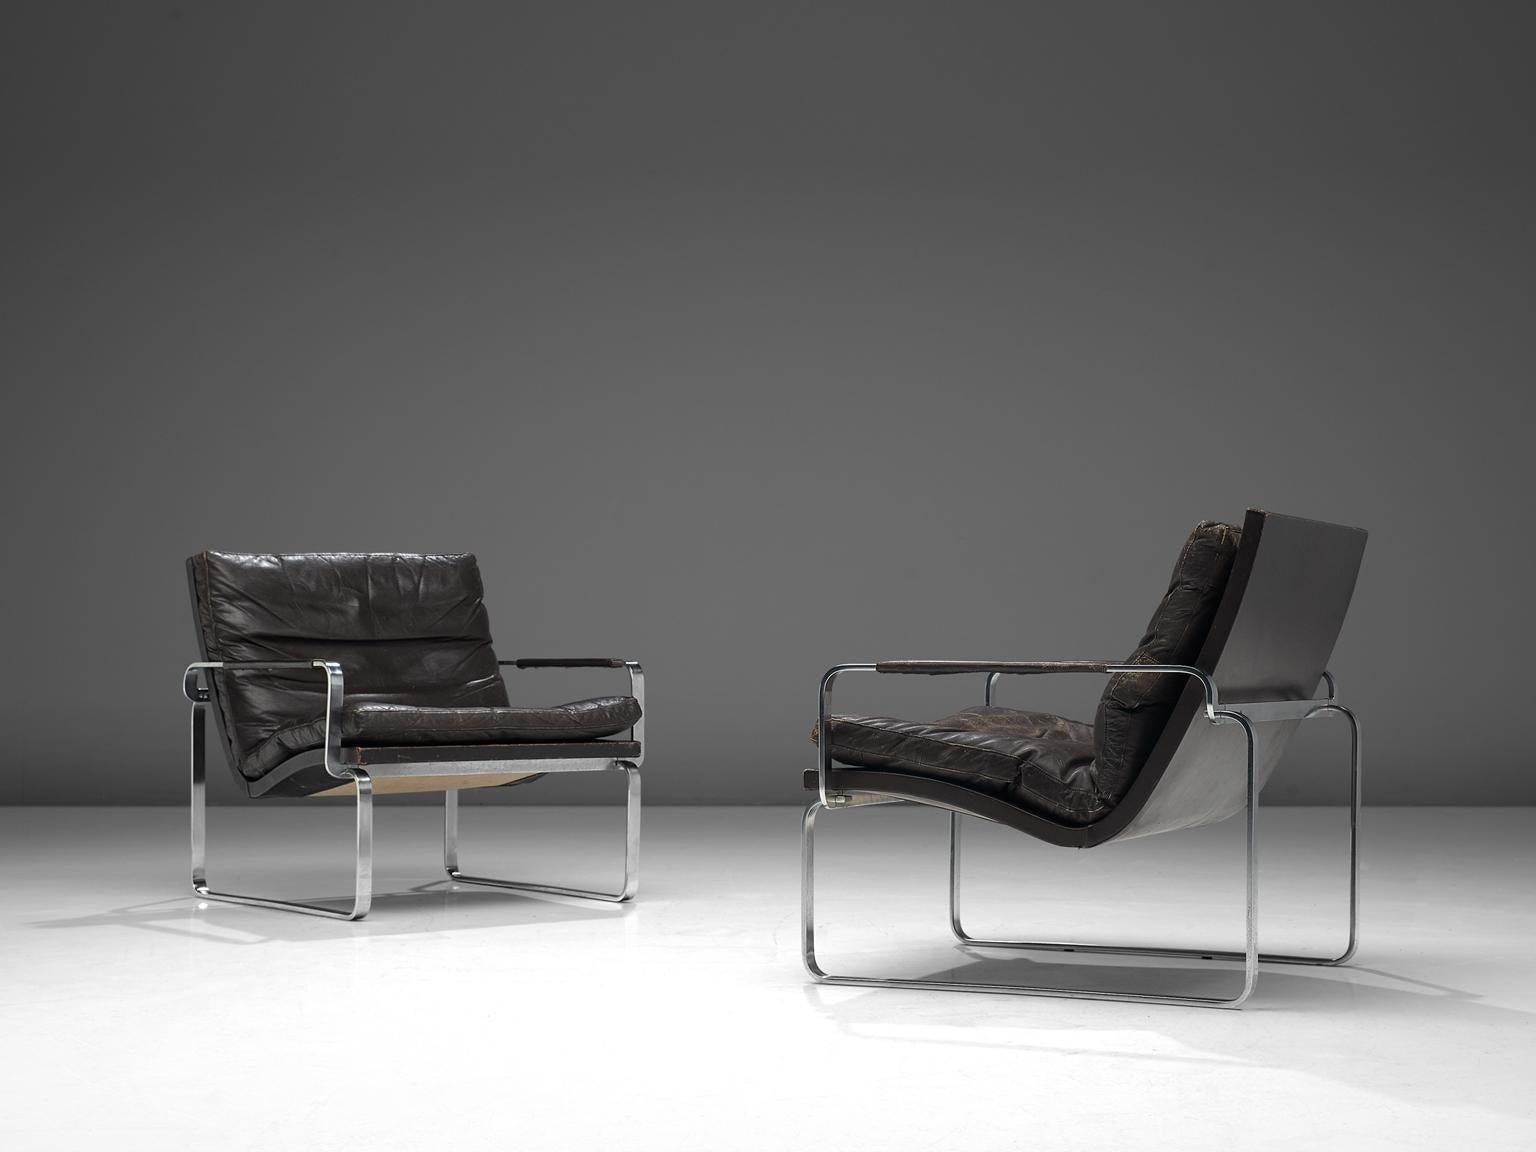 Jørgen Lund and Ole Larsen for Bo-Ex, pair of BO 911 armchairs, dark brown leather, chrome-plated steel, Denmark, 1960s

Two modern armchairs chairs in steel and leather. Not originally a set, due to small differences. An interesting detail is the